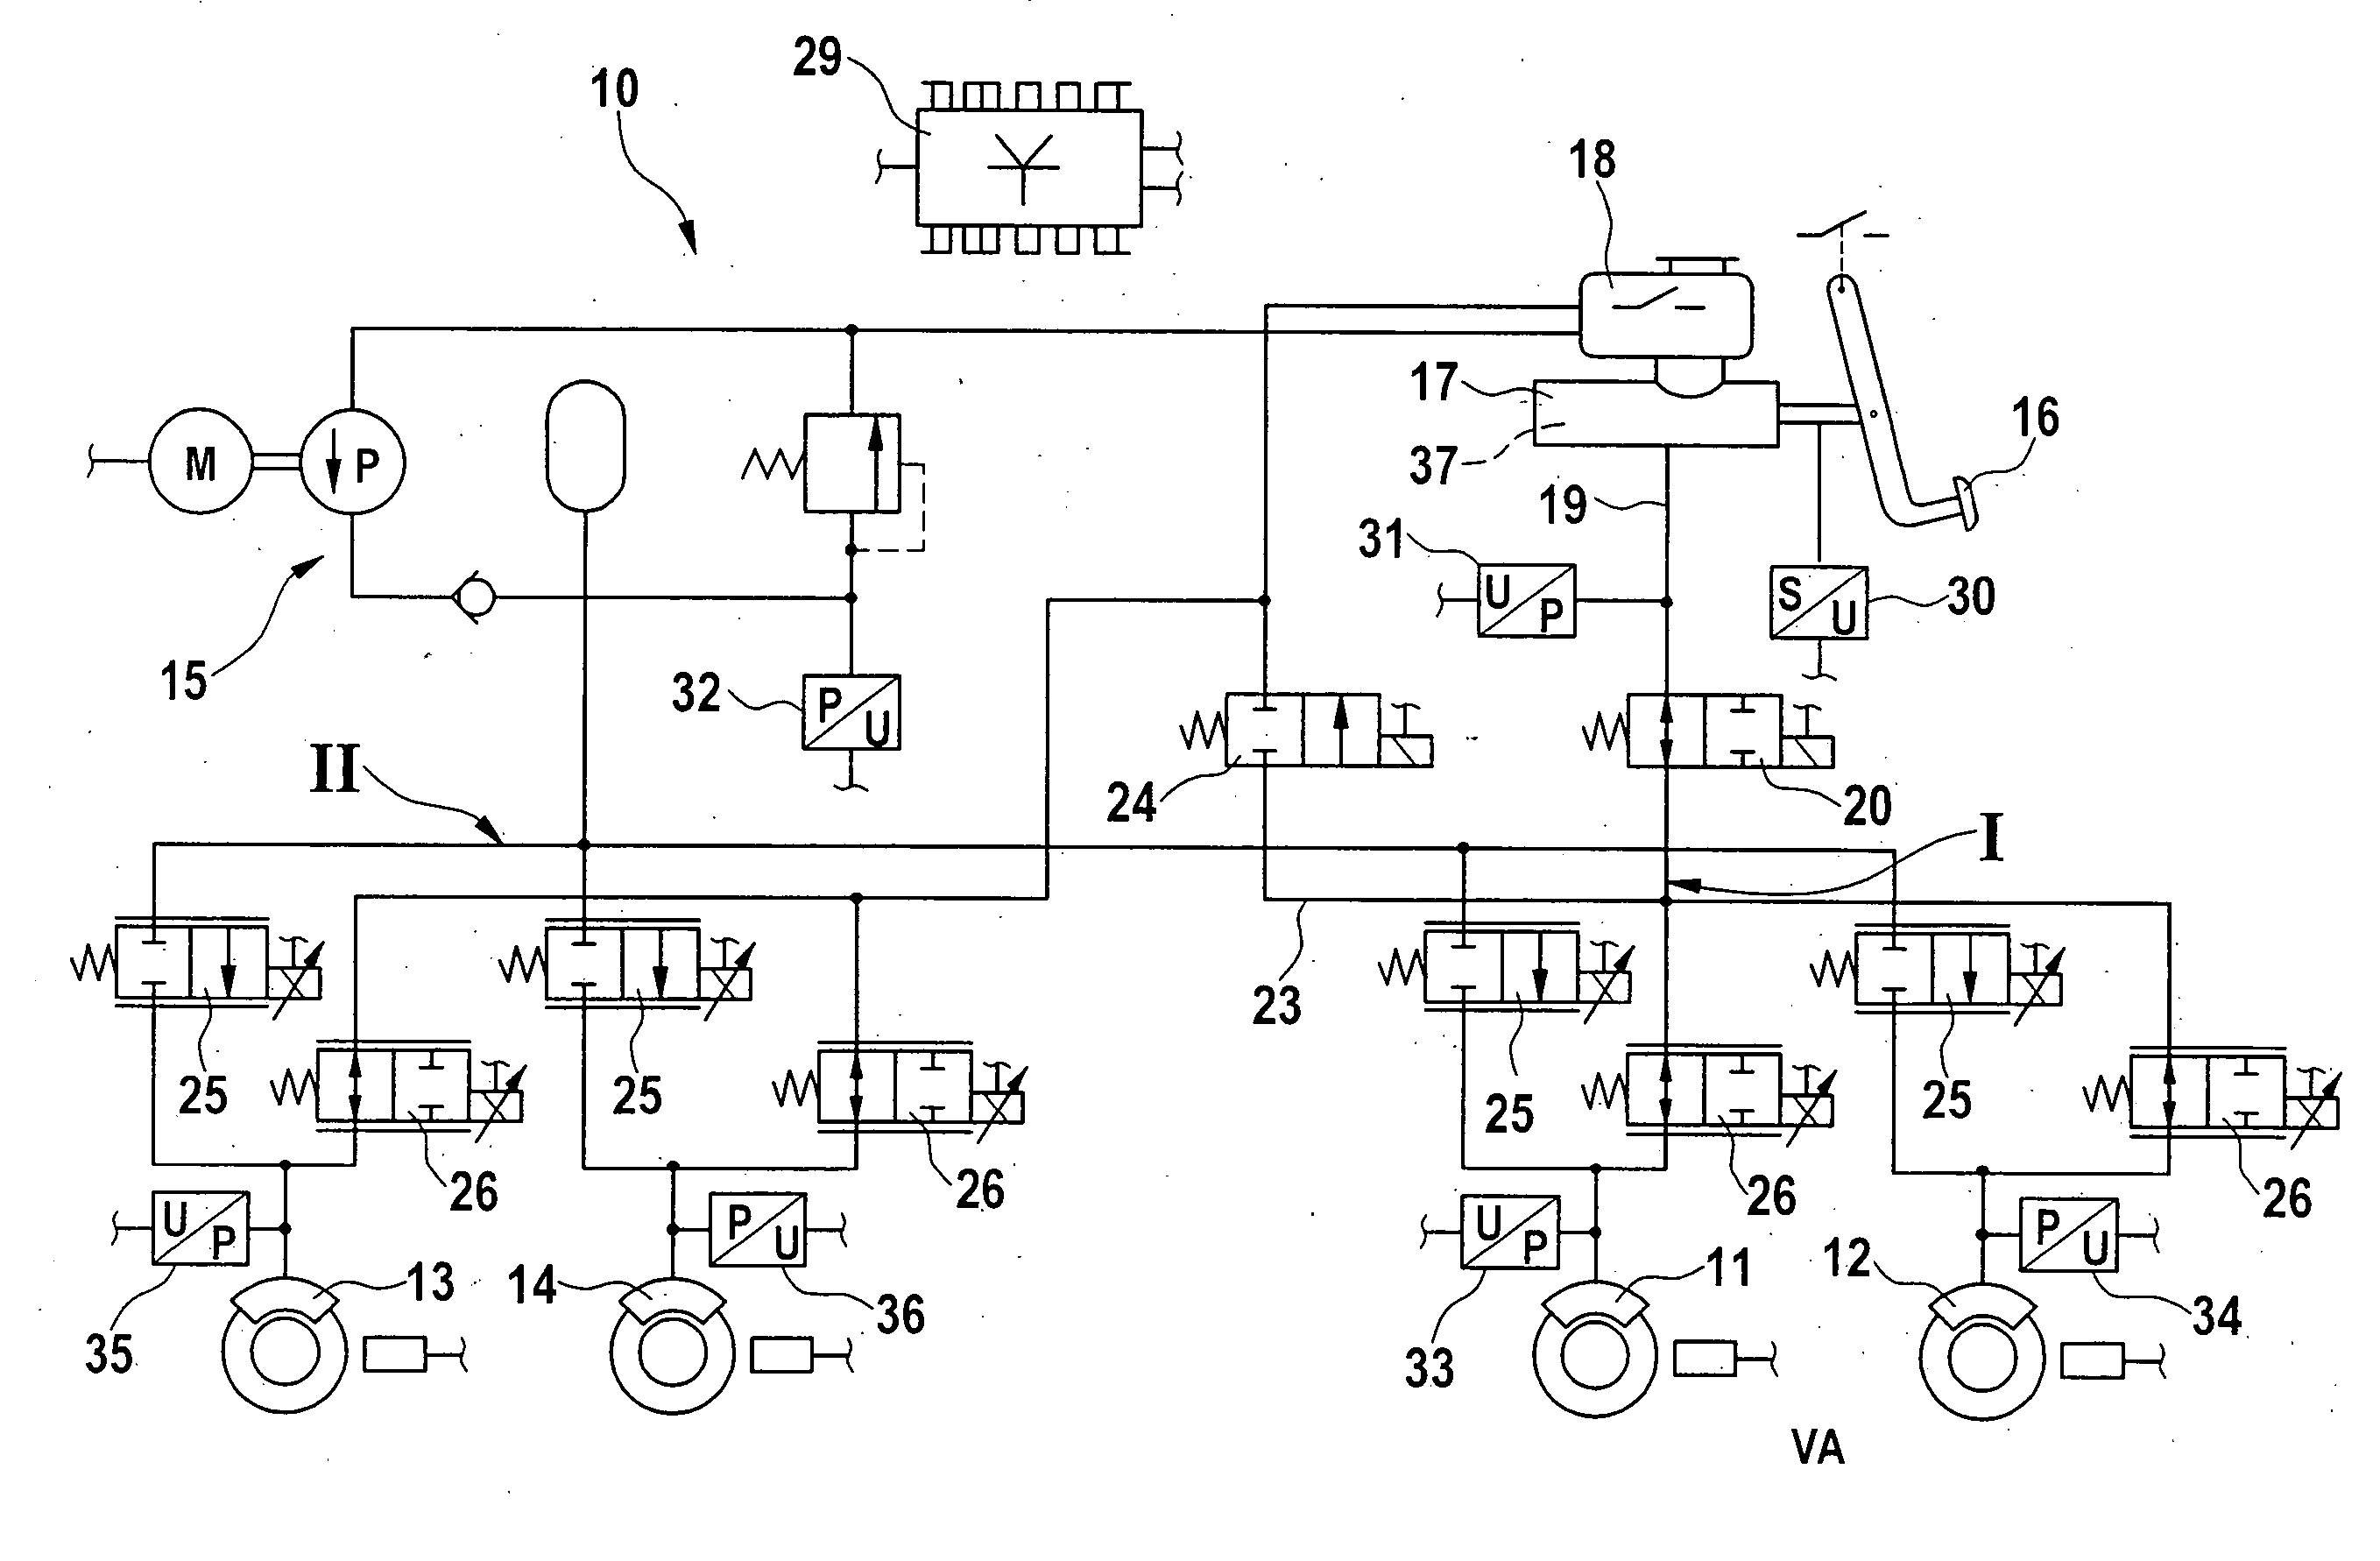 Method for operating a brake system of a motor vehicle